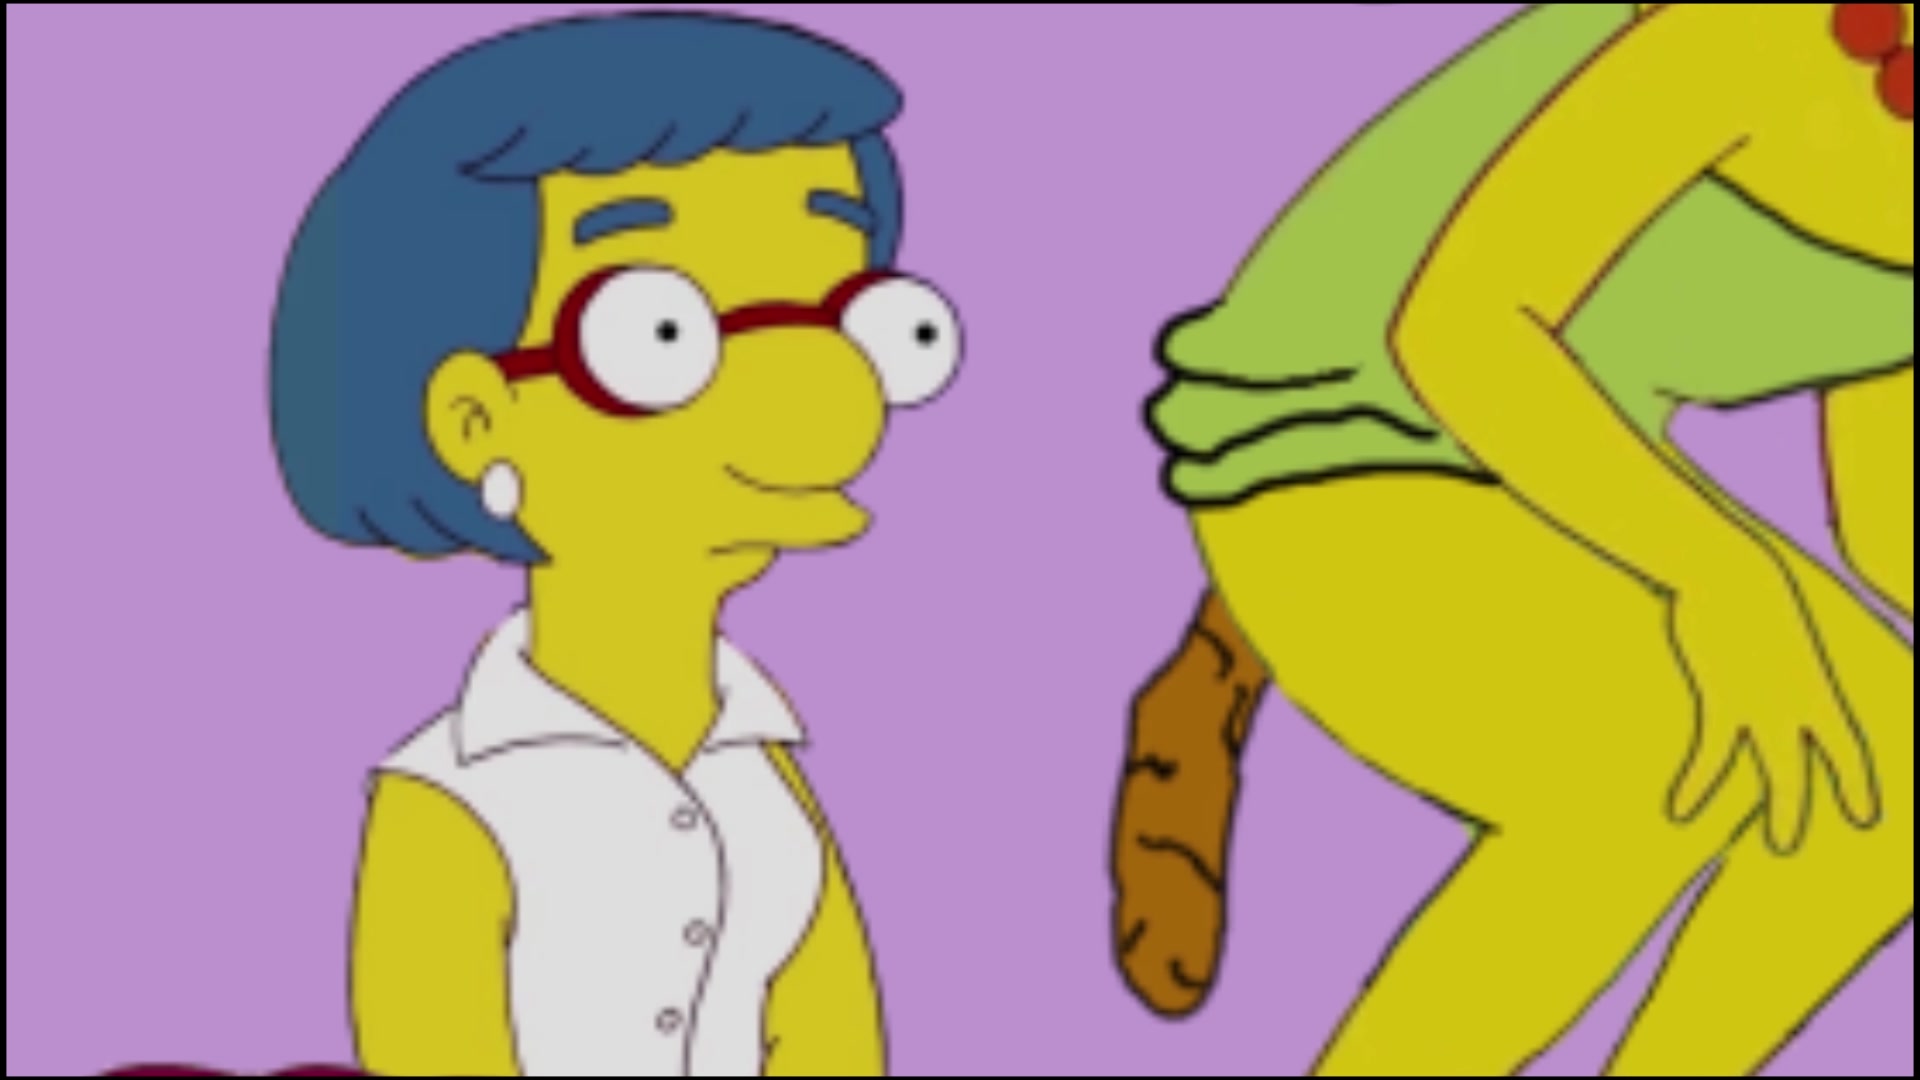 Extreme Cartoon Porn Simpsons - Cartoon Scat - Episode 02 : Marge et Luann - ScatFap.com - scat porn search  - FREE videos of extreme kaviar and copro sex, dirty shit eating and  smearing